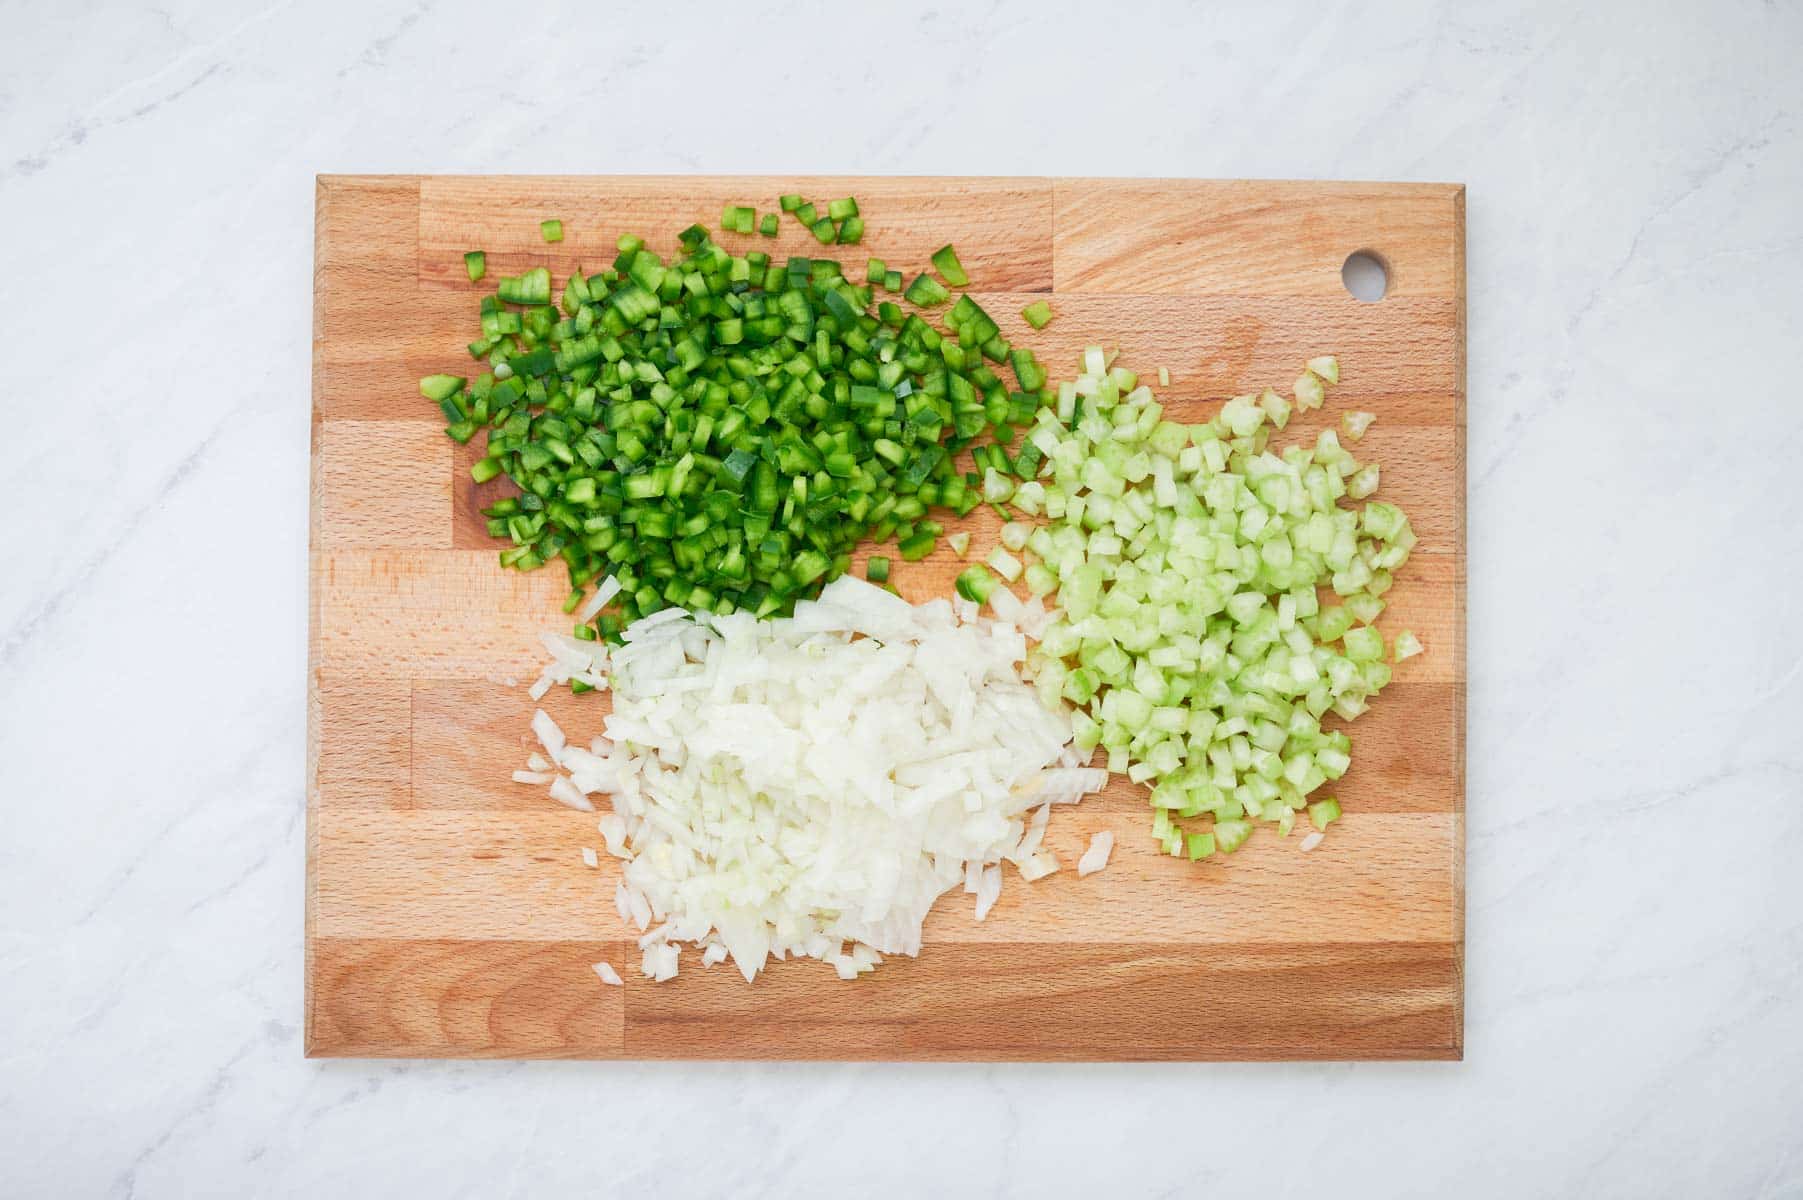 Green bell pepper, celery, and onion are diced.